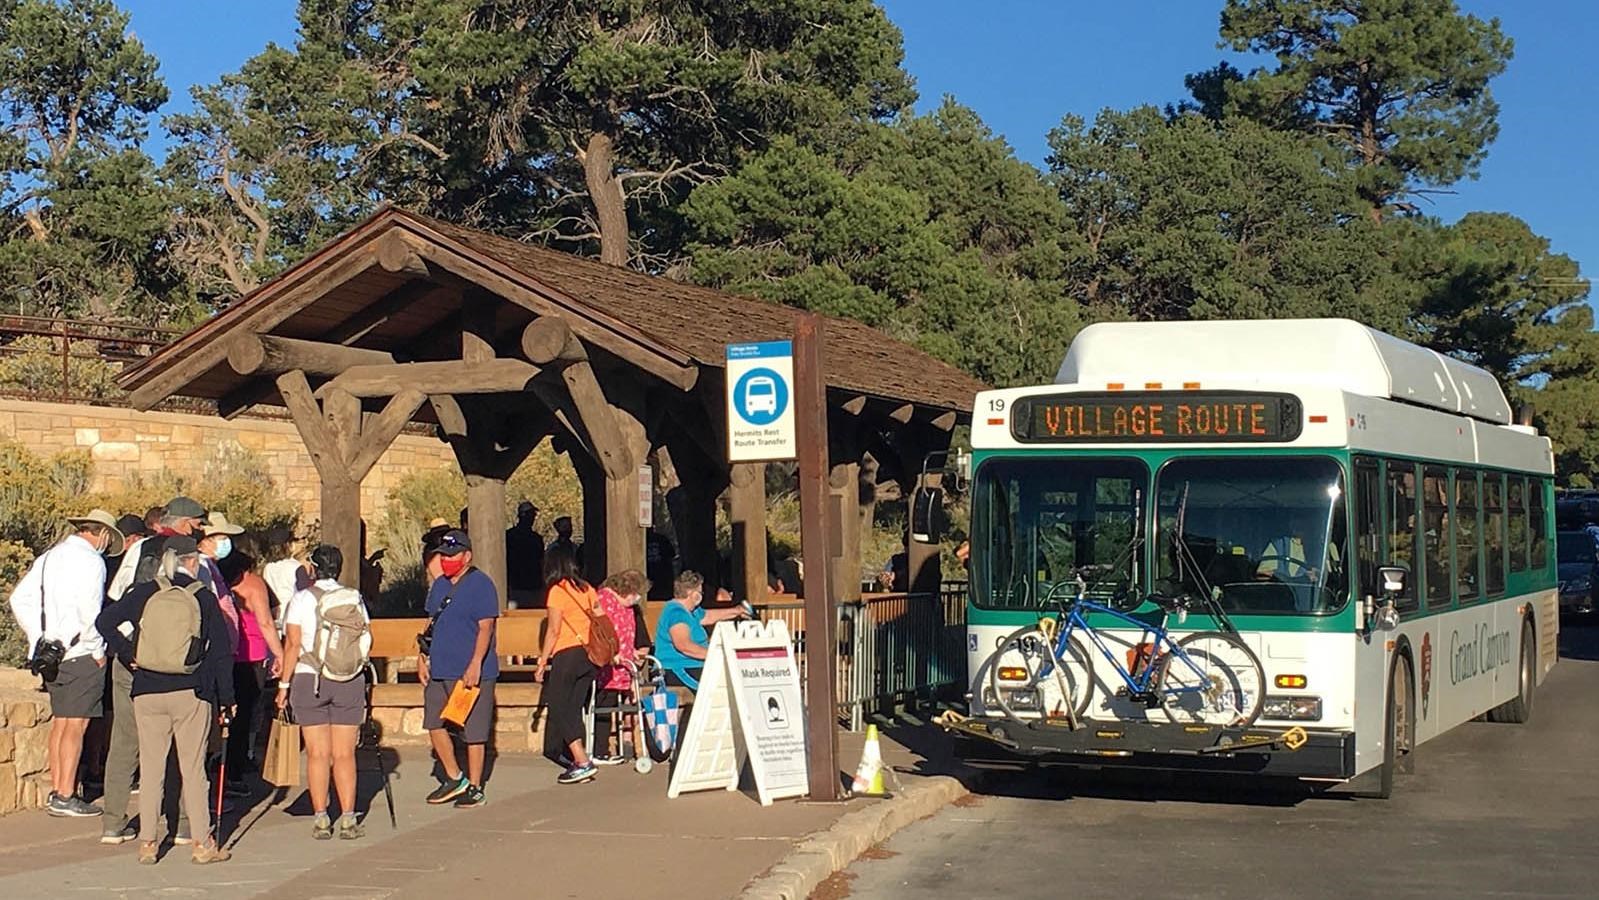 People boarding a large shuttle bus at a bus stop with an rustic, open-air shade structure and 